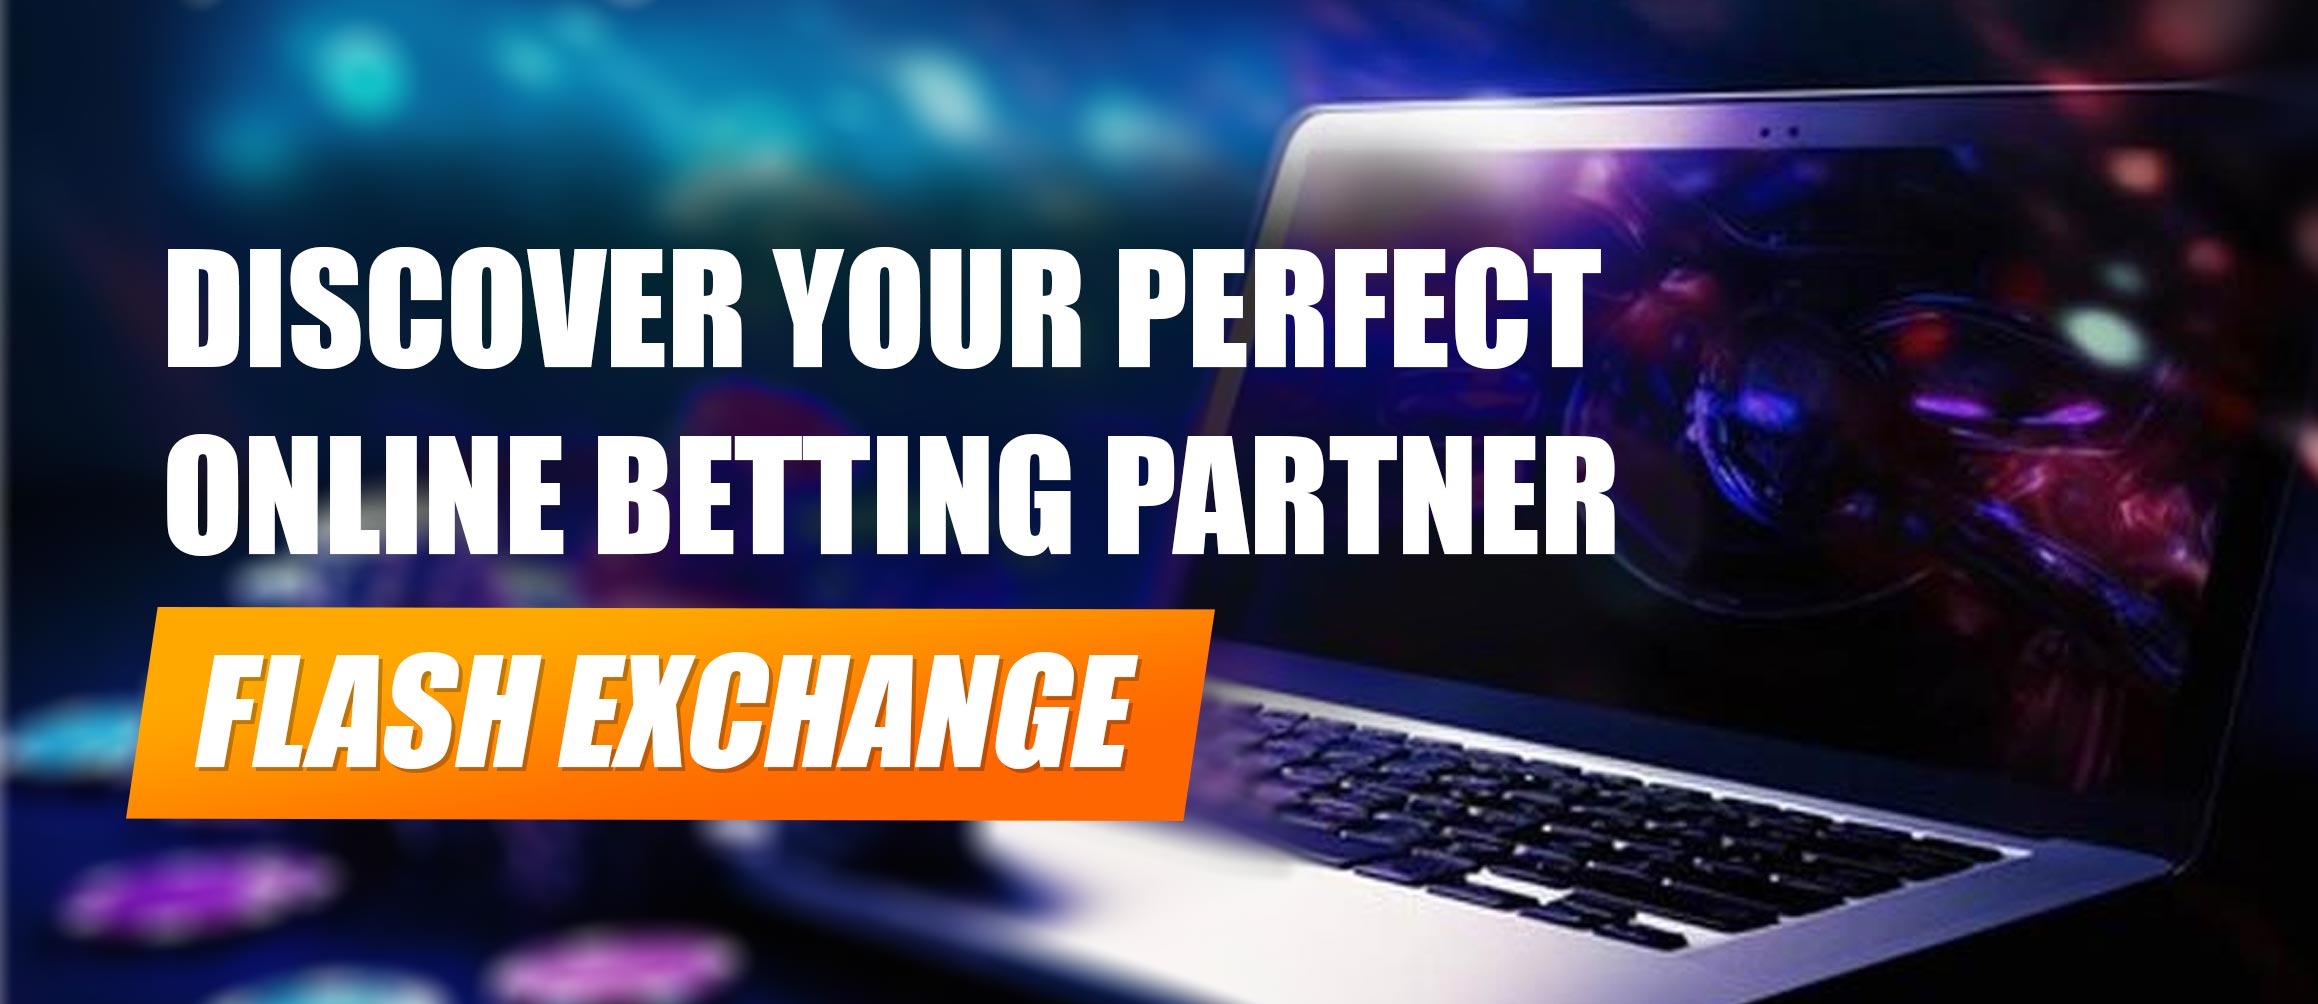 Discover Your Perfect Online Betting Partner: Flash Exchange